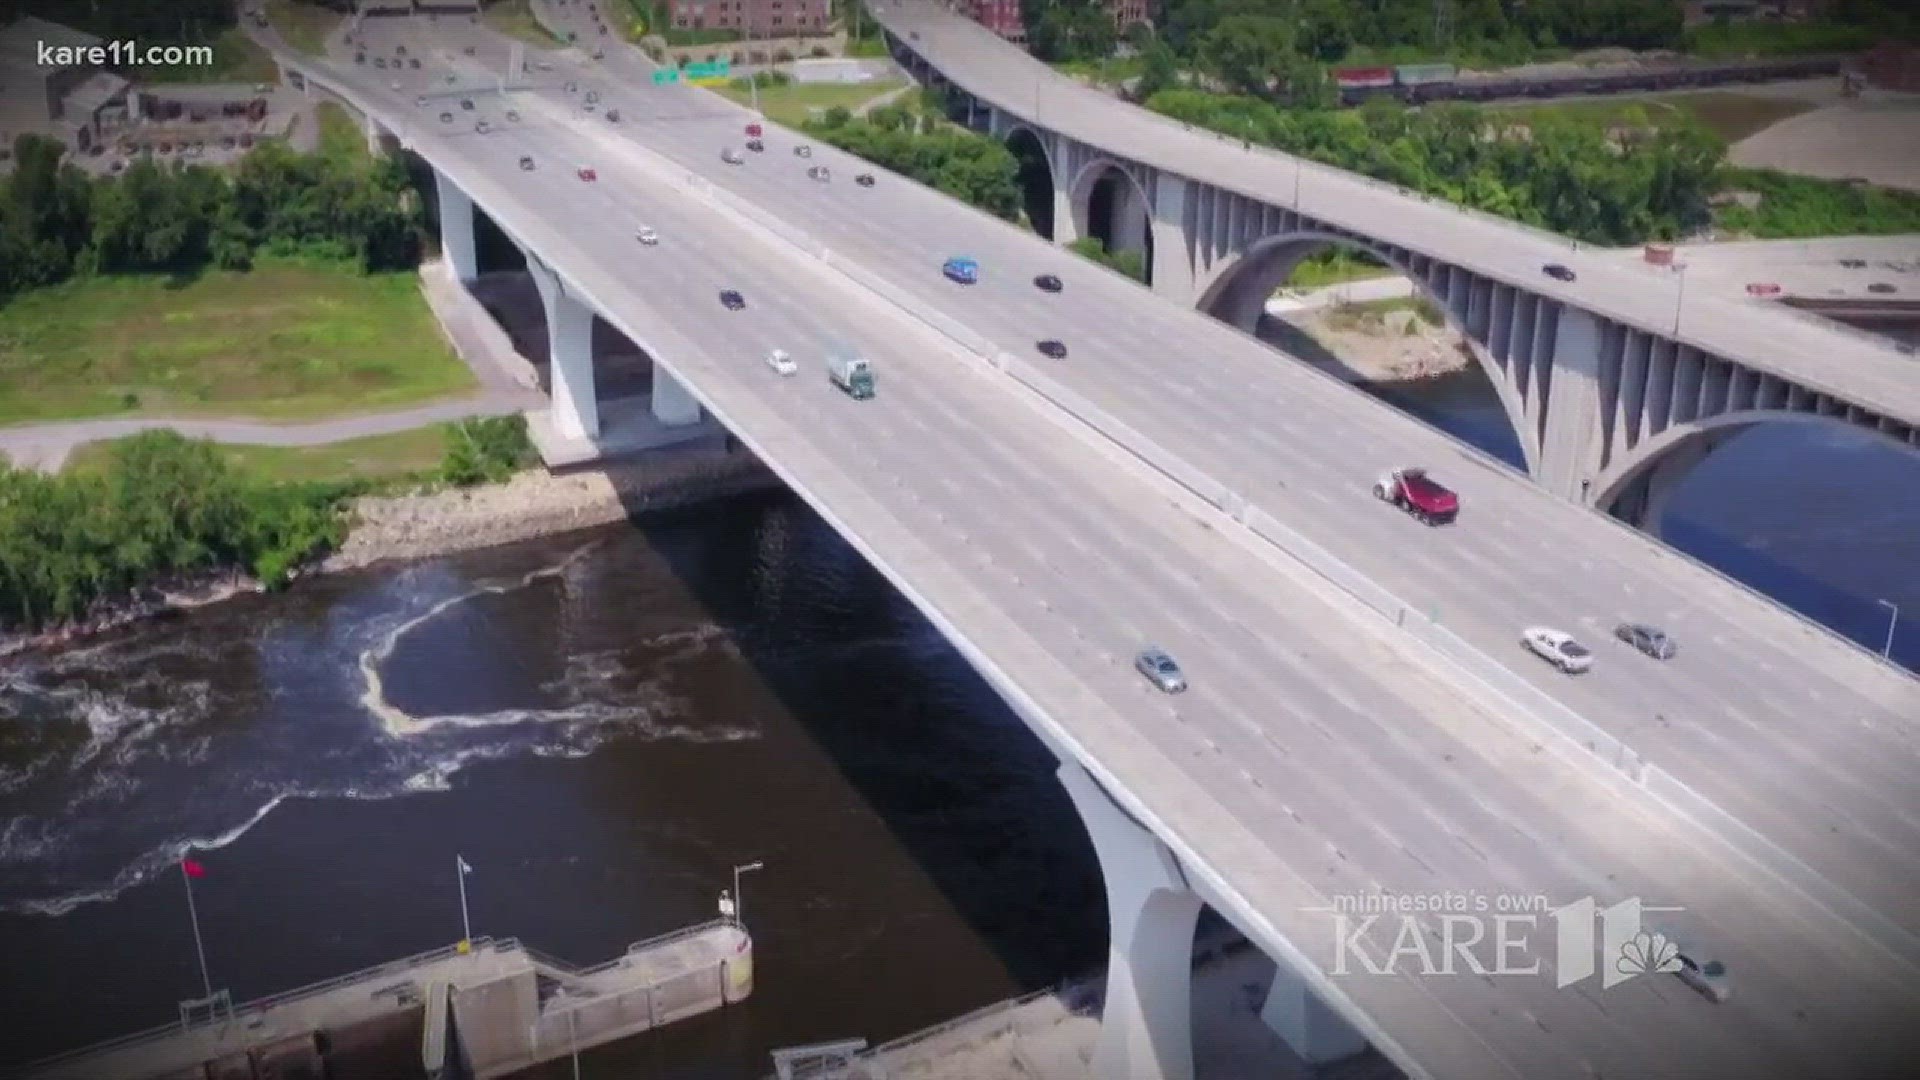 The company that also designed the new 35W bridge, FIGG Bridge Group, said in a statement they are "stunned" by the collapse in Miami. http://kare11.tv/2DxBtKF